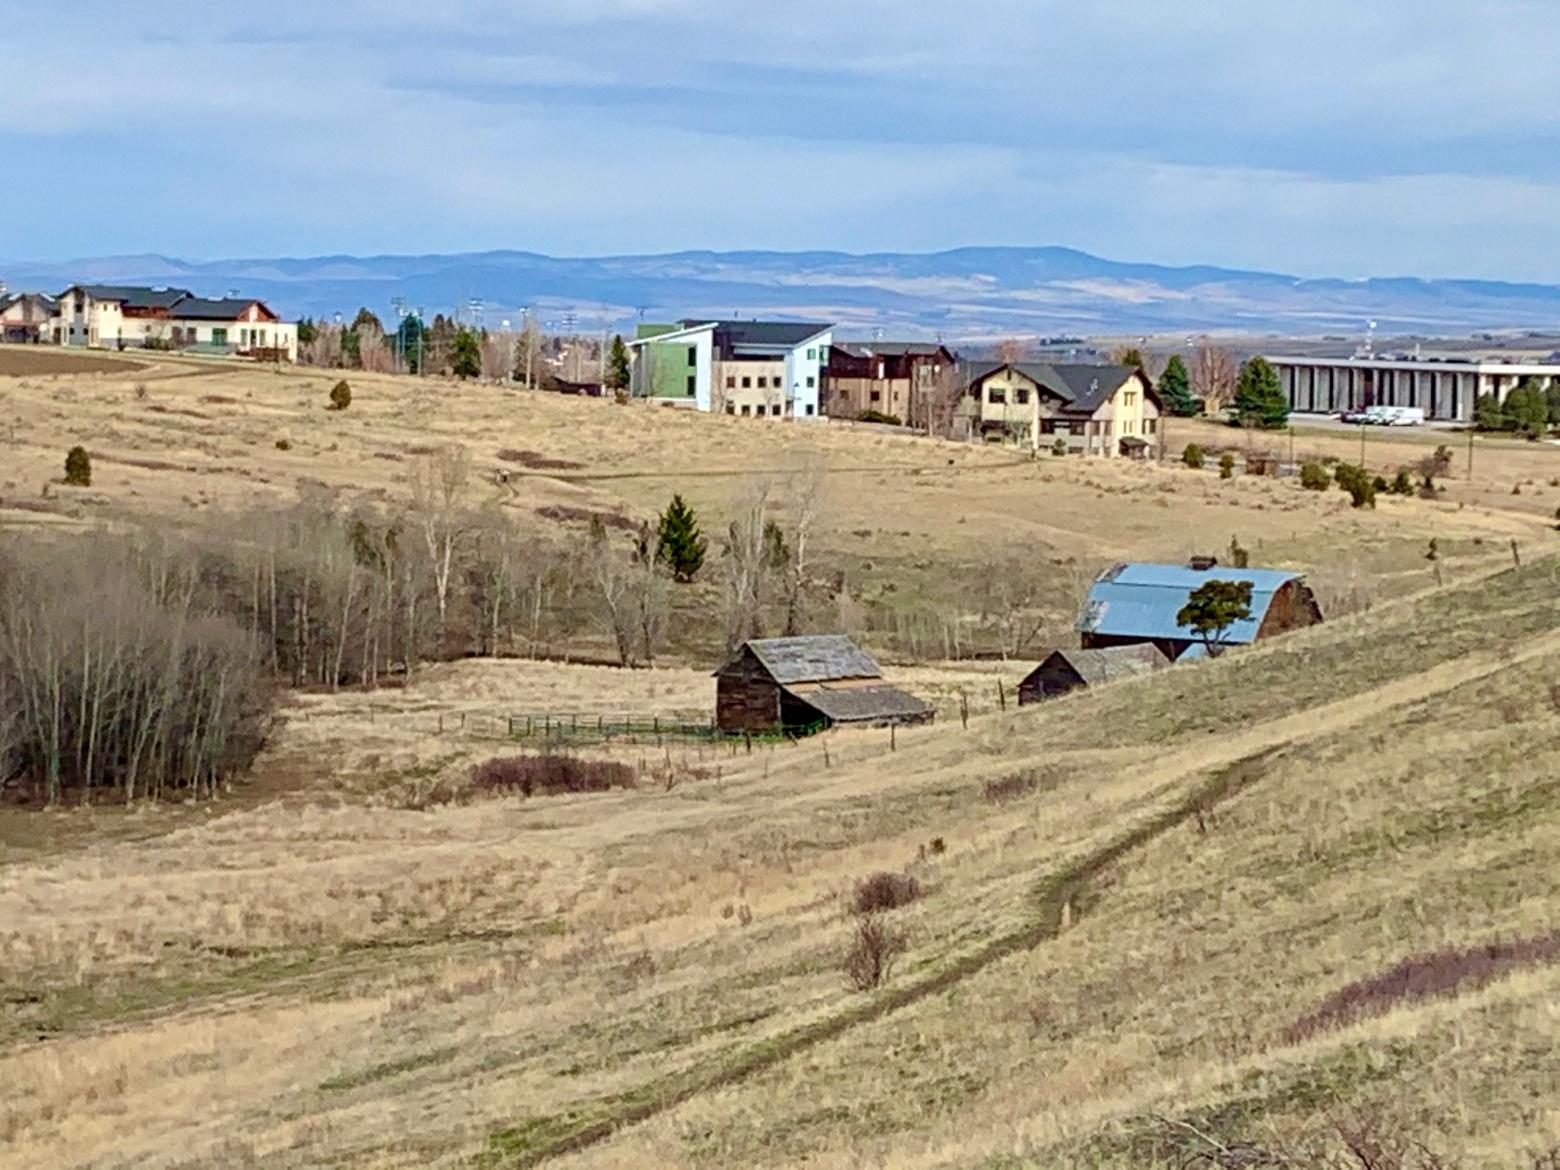 Just east of Bozeman, a traditional farmstead is enveloped by creeping residential and commercial dveleopment.  Any boundary between "urban" and "rural" is haphazardly arranged with no organization.  Worse, yes pockets of "open space" exist but over time they hold less and less value for wildlife, save for "weedy" white-tailed deer that can thrive almost anywhere while elk, mule deer and moose cannot. Photo by Todd Wilkinson